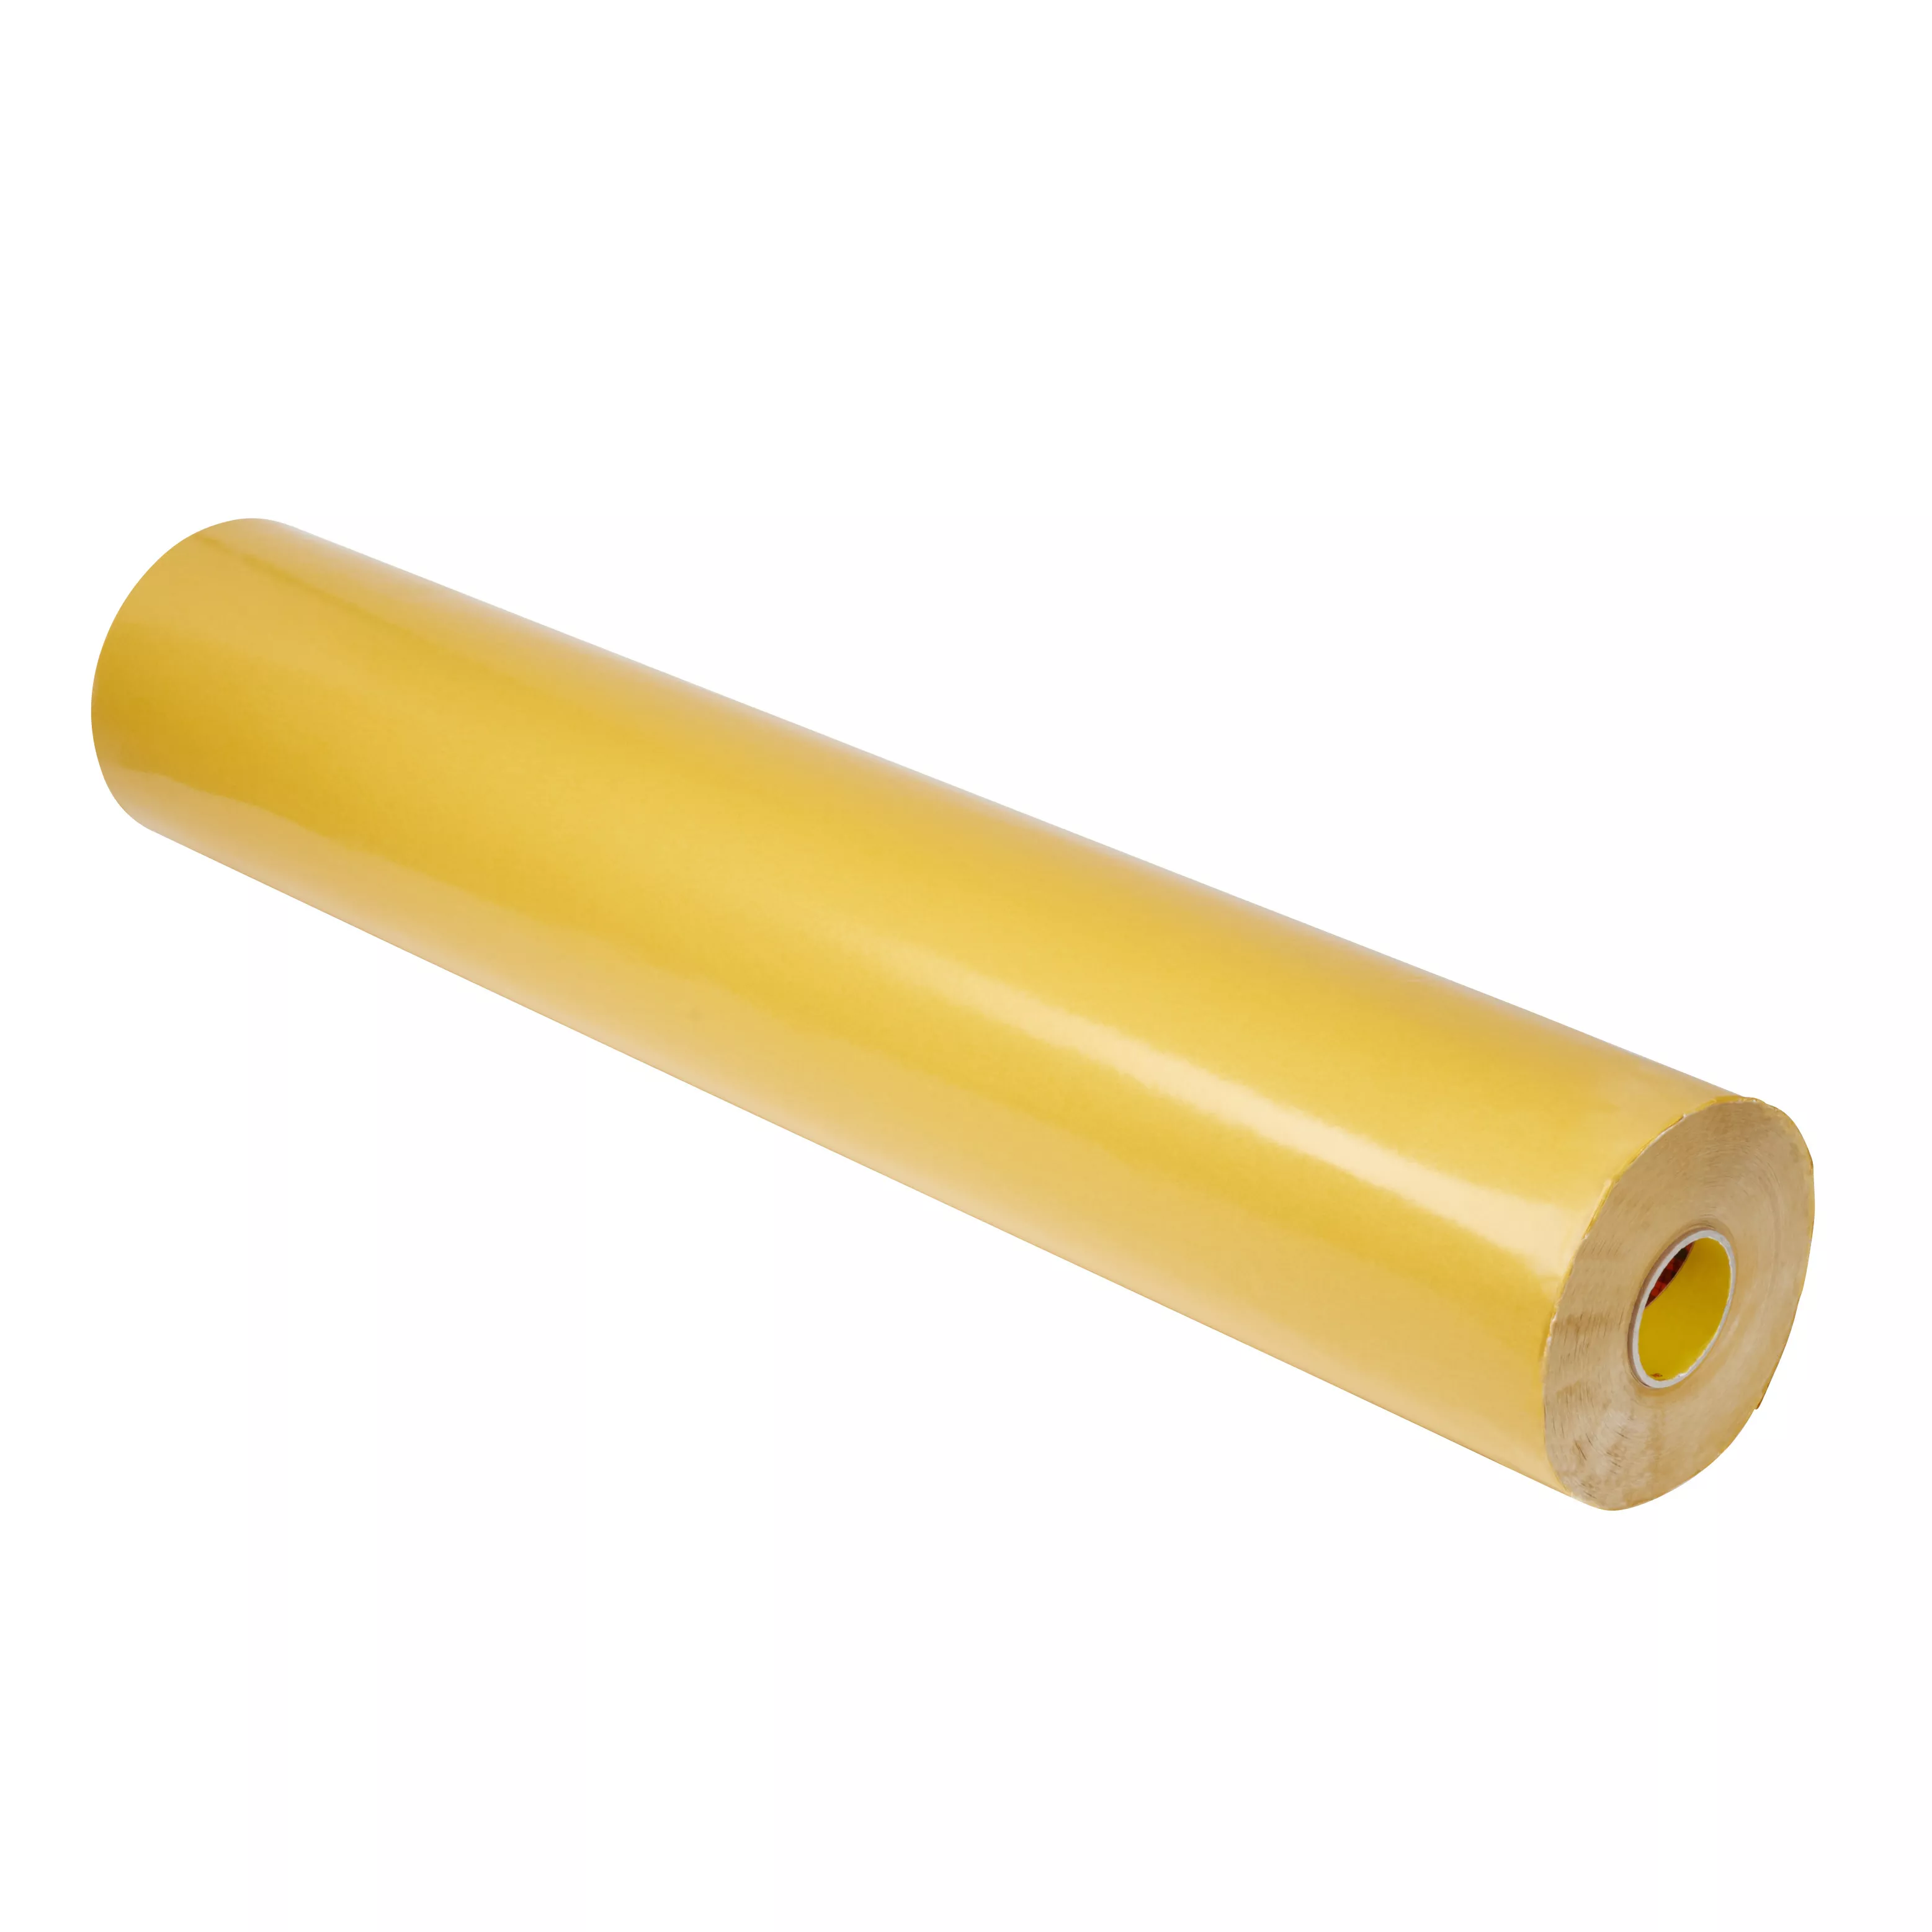 Product Number 927 | 3M™ Adhesive Transfer Tape 927